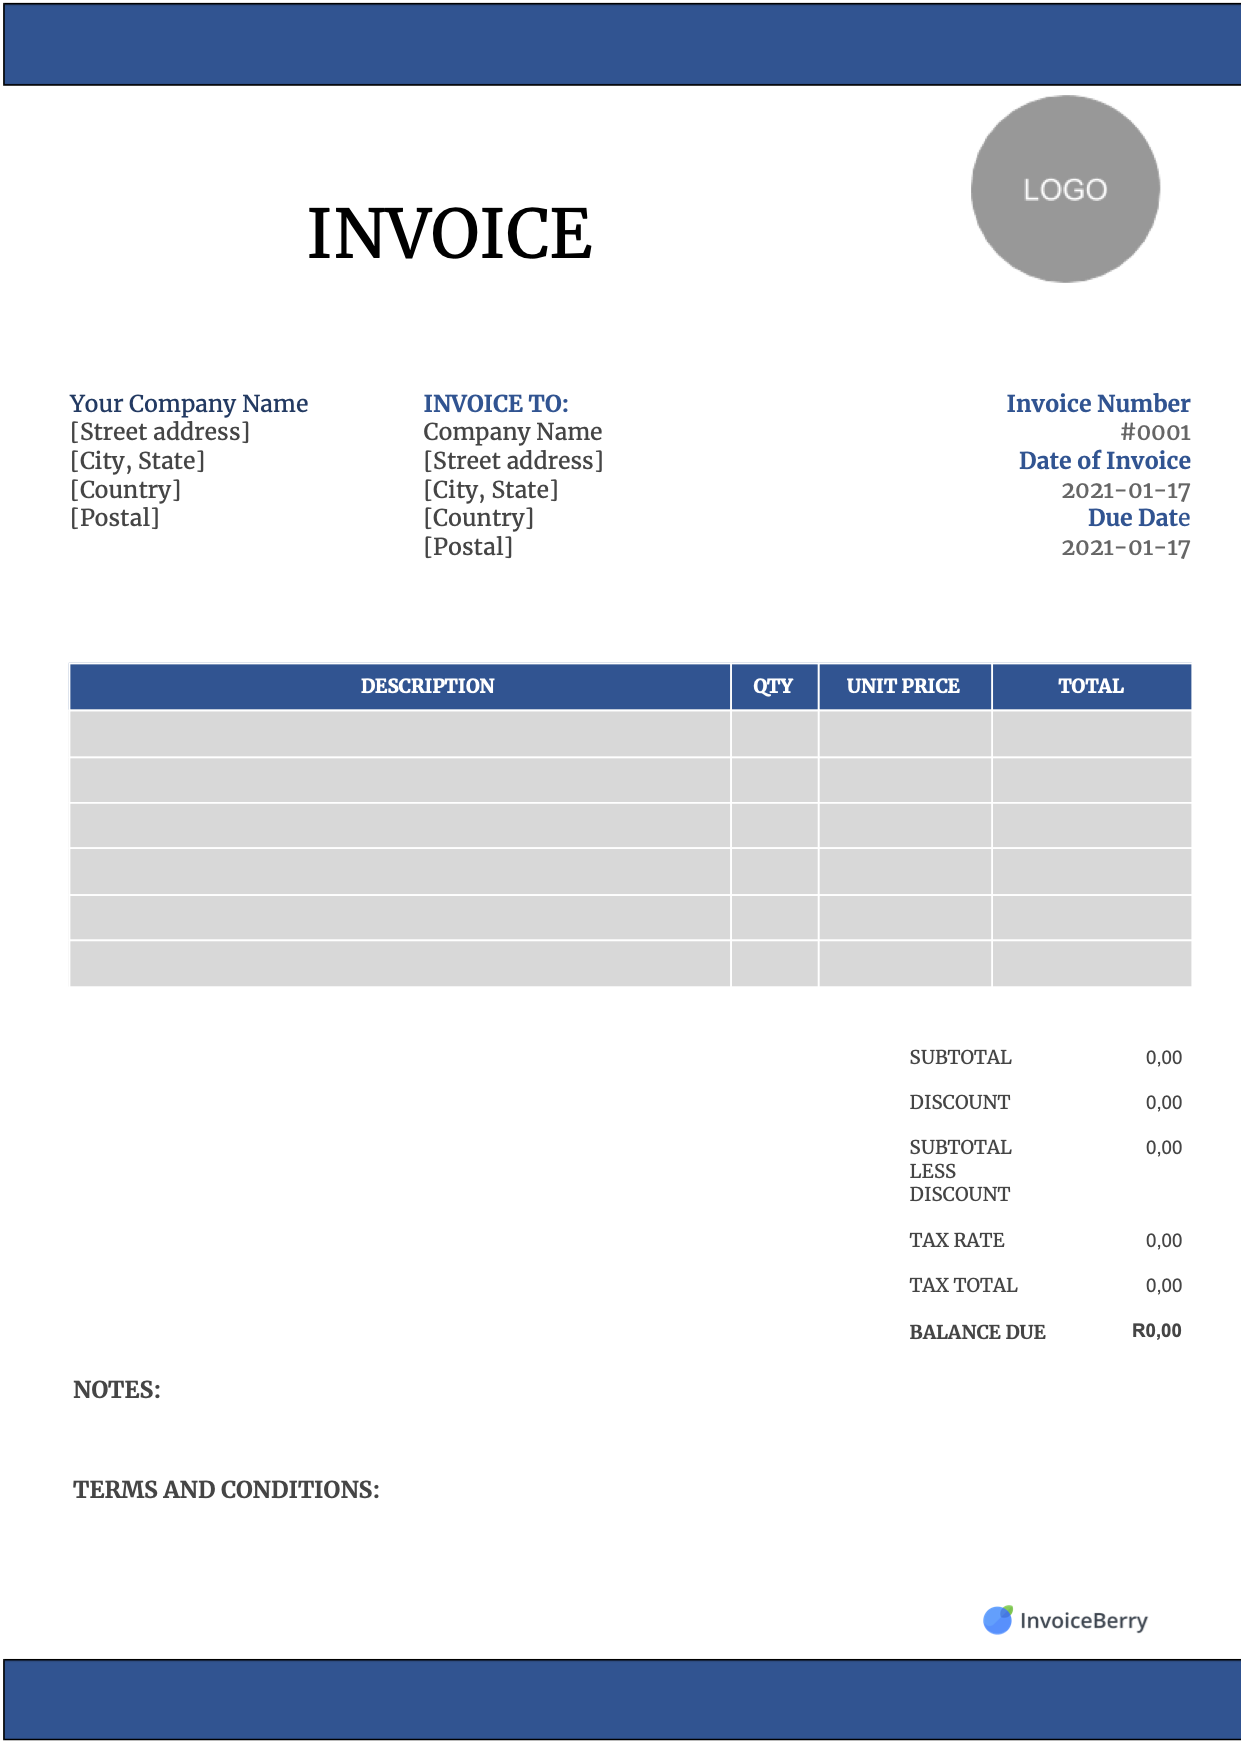 Free Invoice Templates Download - All Formats and Industries Throughout Free Printable Invoice Template Microsoft Word